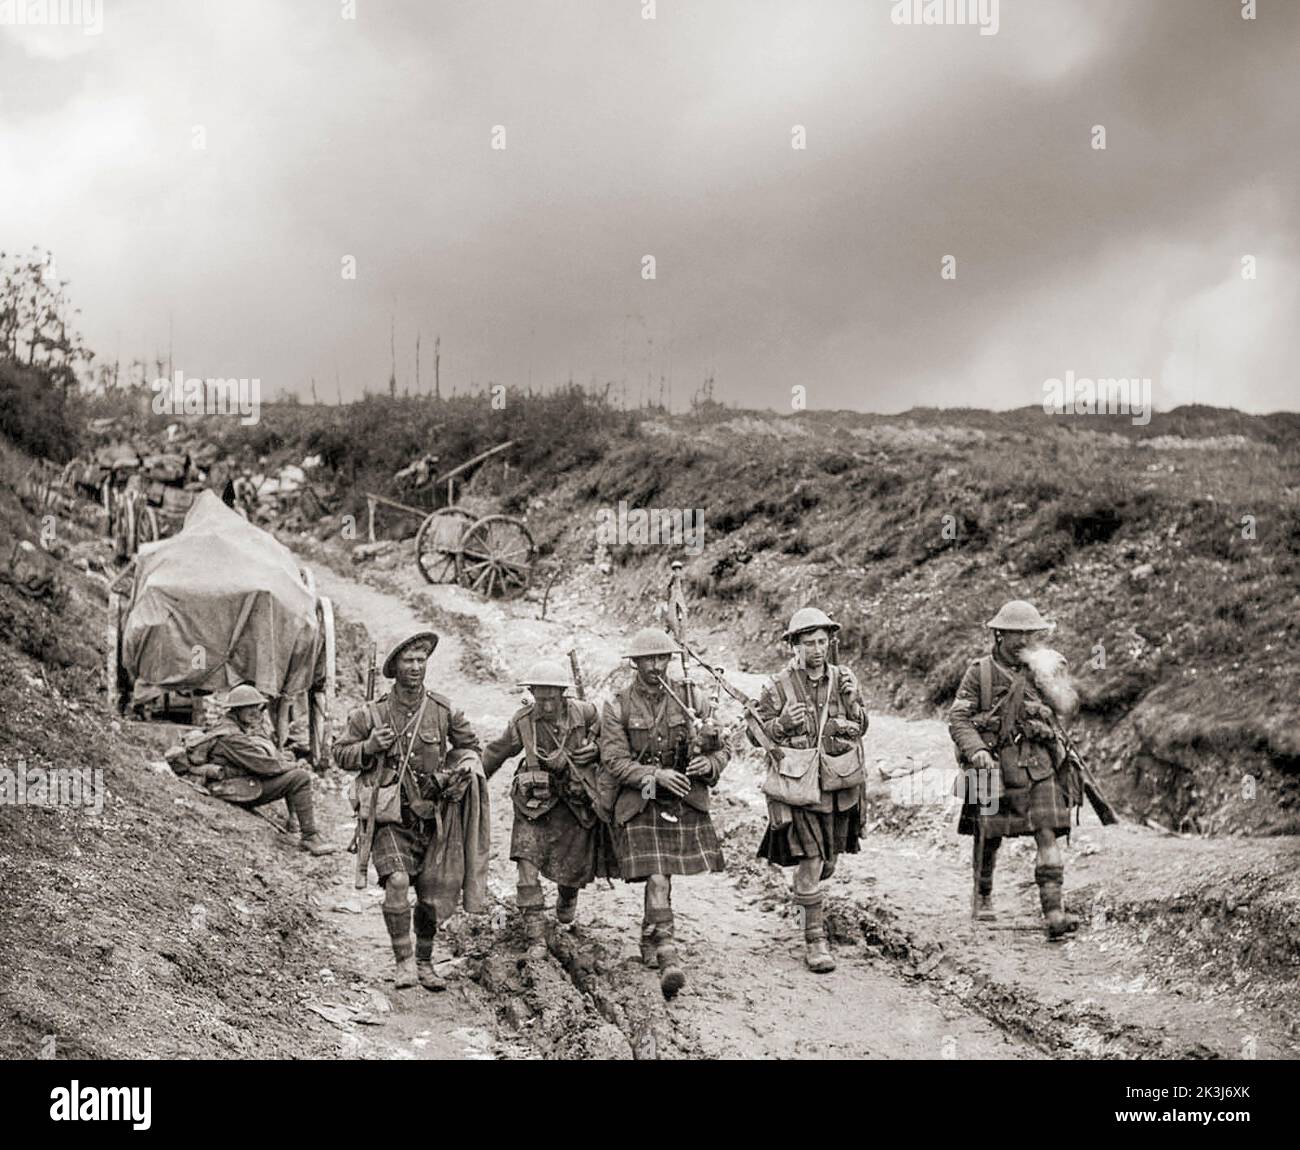 A piper of the 7th Seaforth Highlanders leads four men of the 26th Brigade back from the trenches after the attack on Longueval during the 1916 Battle of the Somme on the Western Front during the First World War. Stock Photo